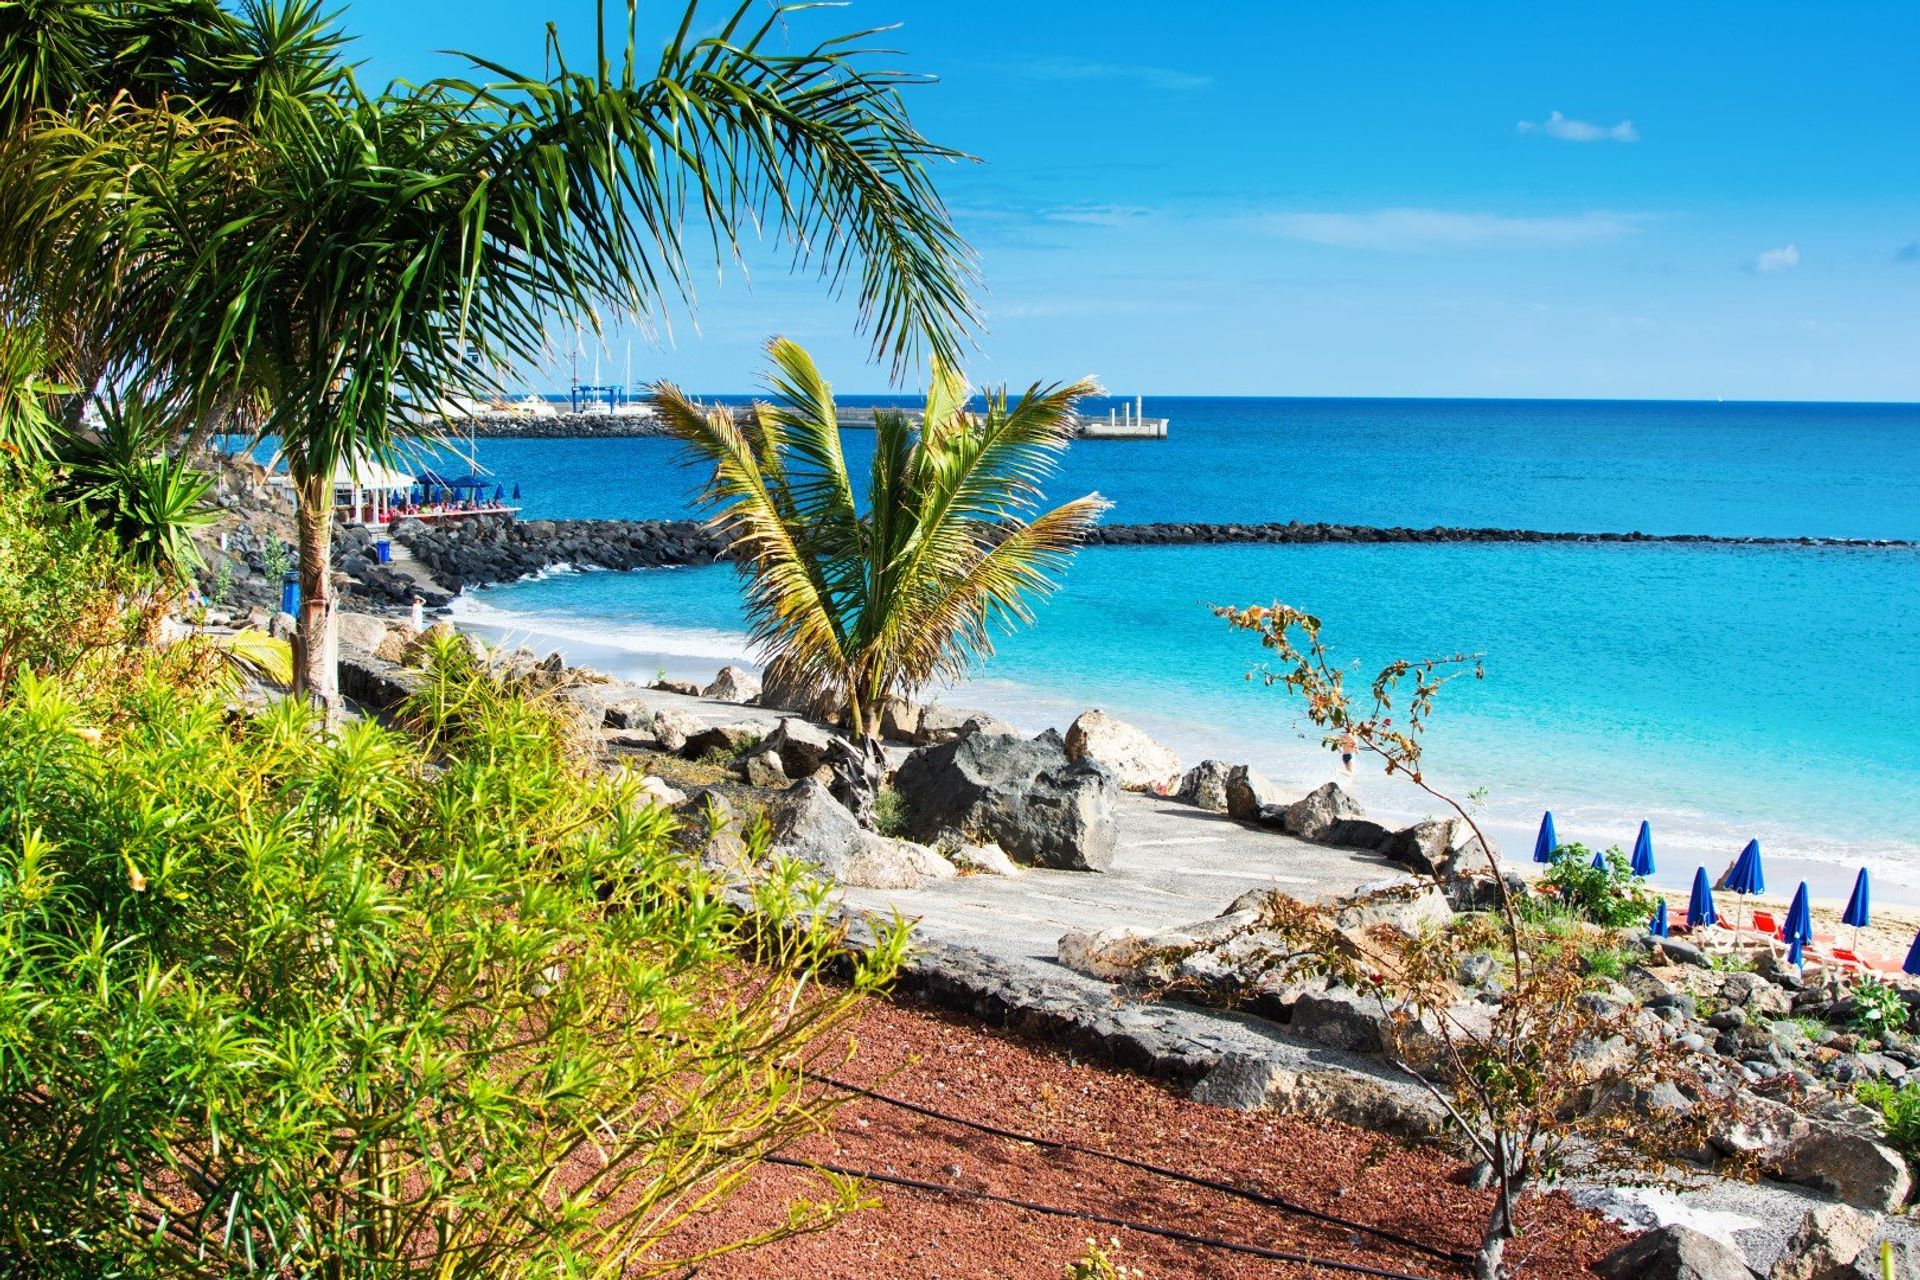 Nestled behind a stunning man-made cove, try your hand at water sports on Playa Dorada